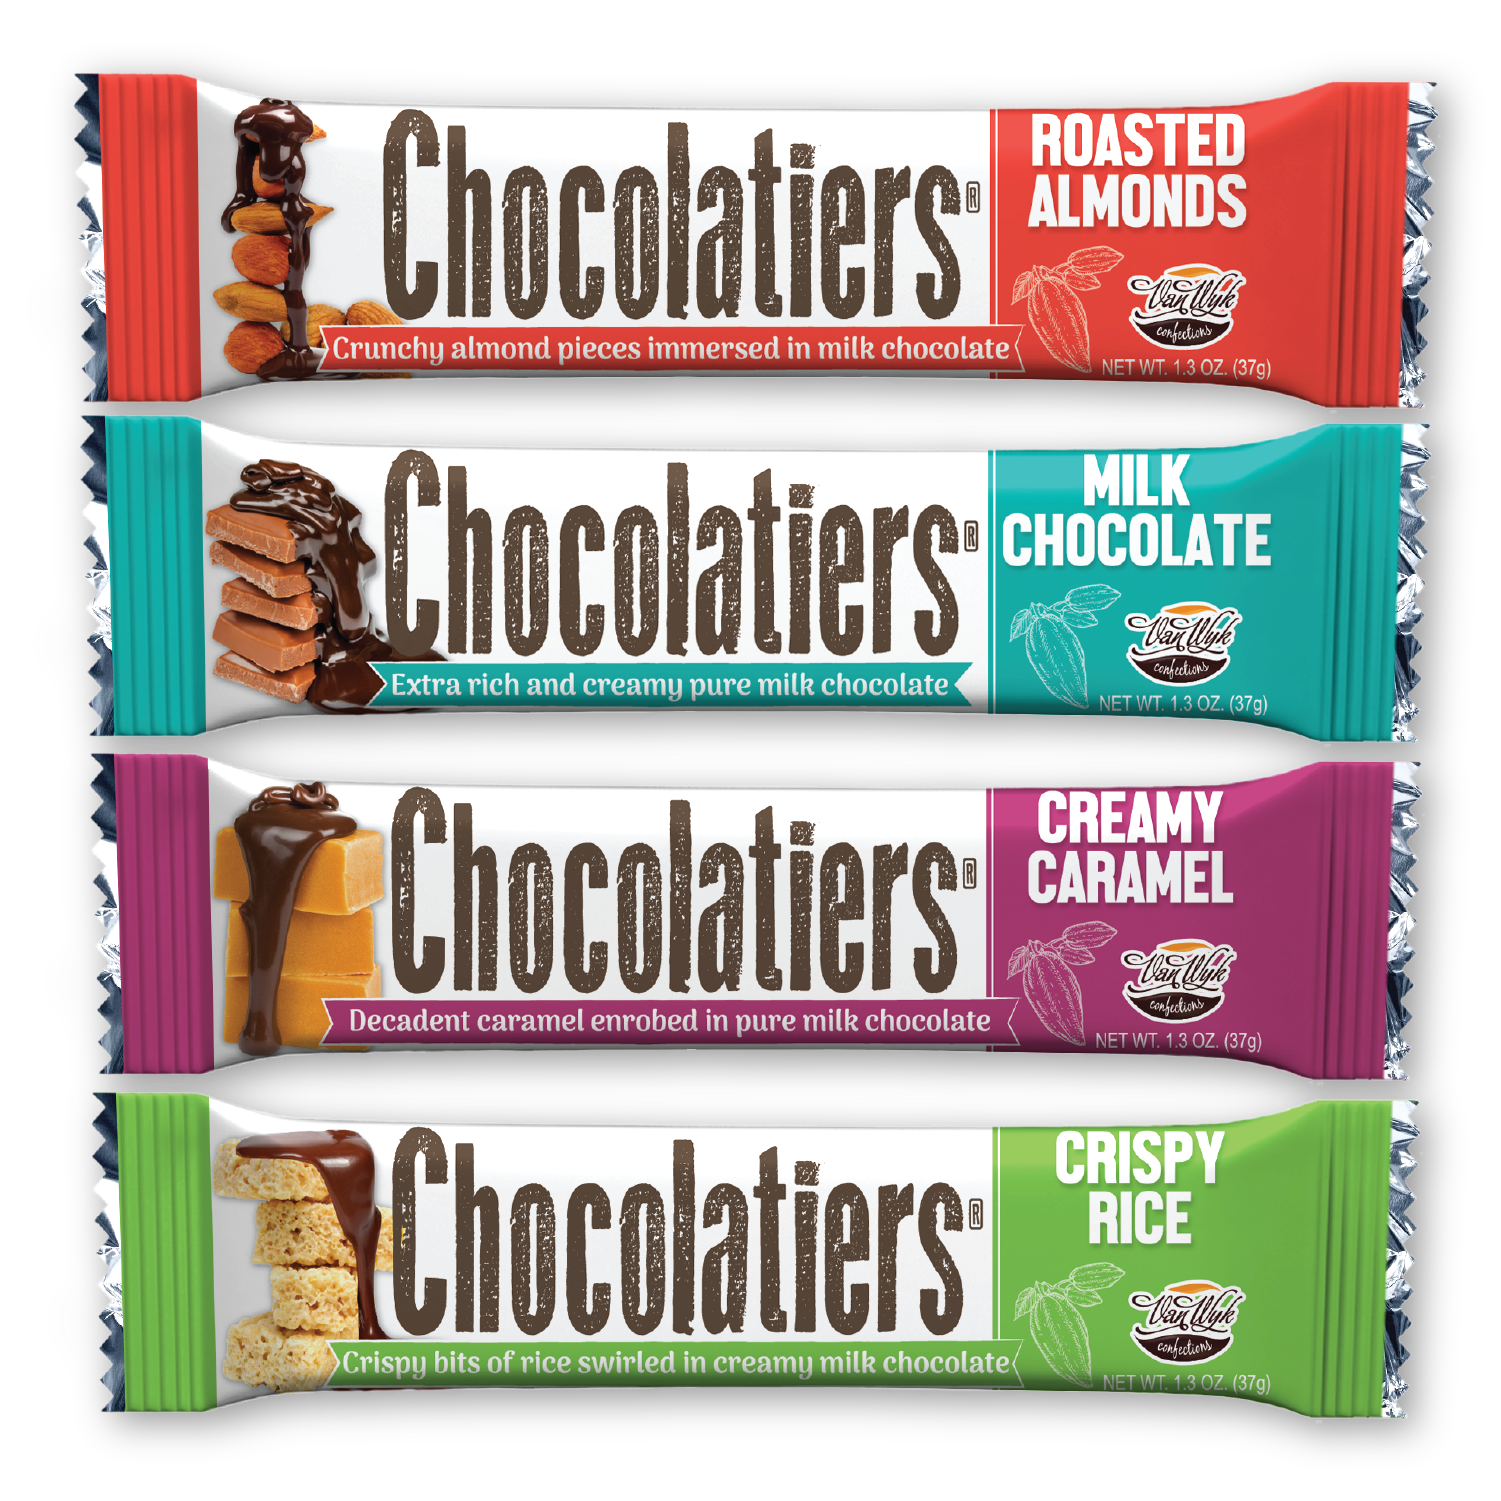 $1 Chocolatiers in Wrappers